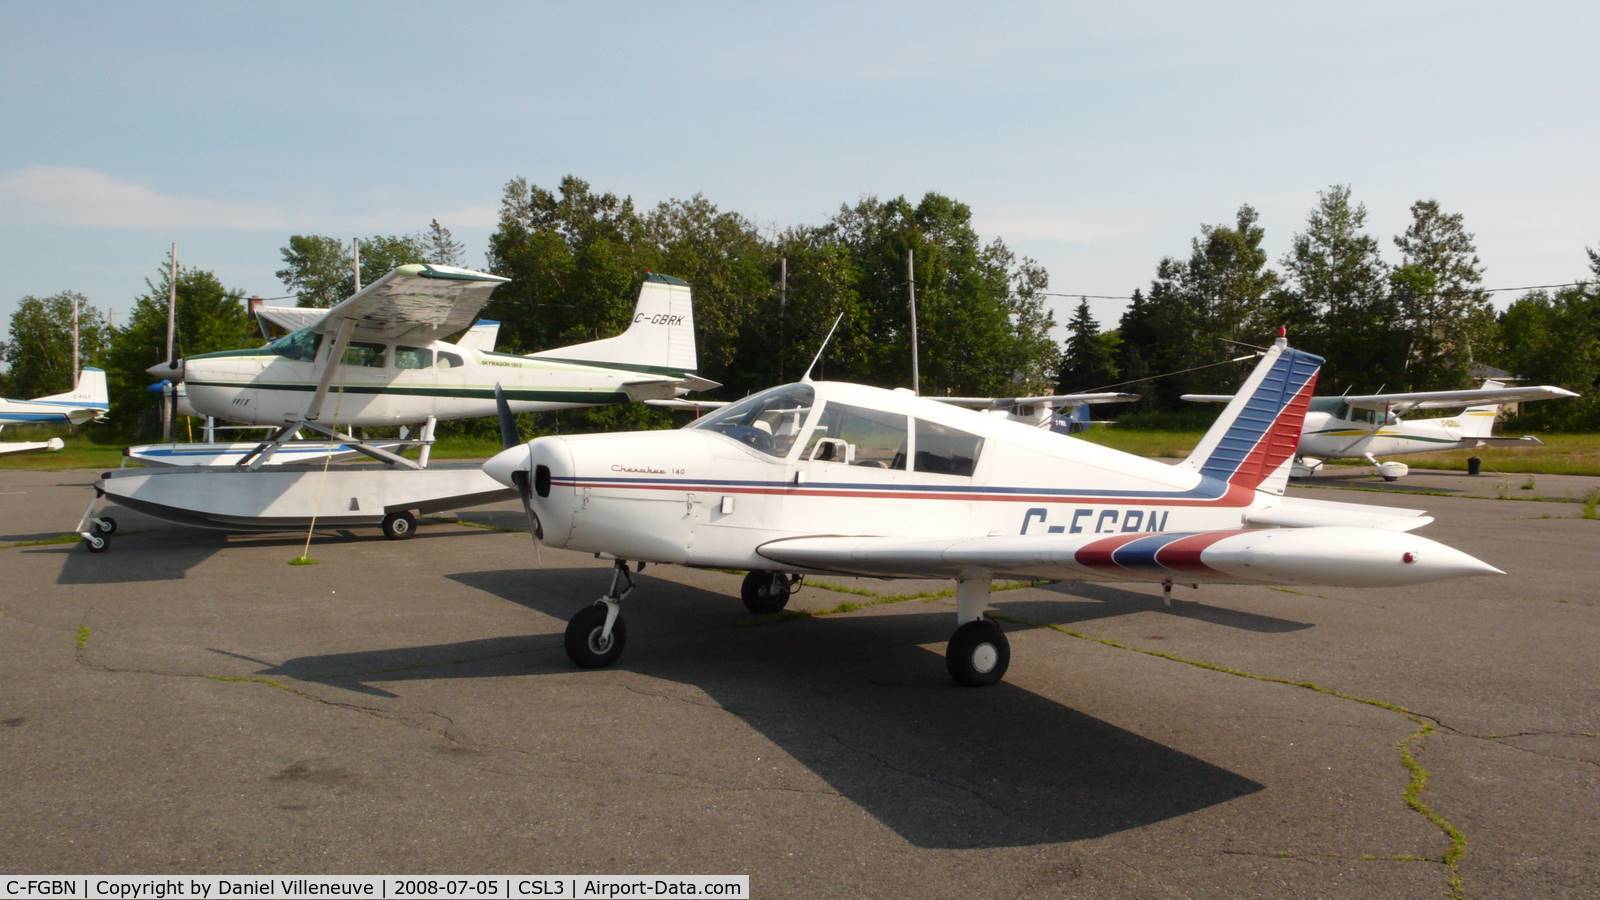 C-FGBN, 1965 Piper PA-28-140 Cherokee C/N 28-20387, C-FGBN parked next to a Cessna 185 at Lac-à-la Tortue